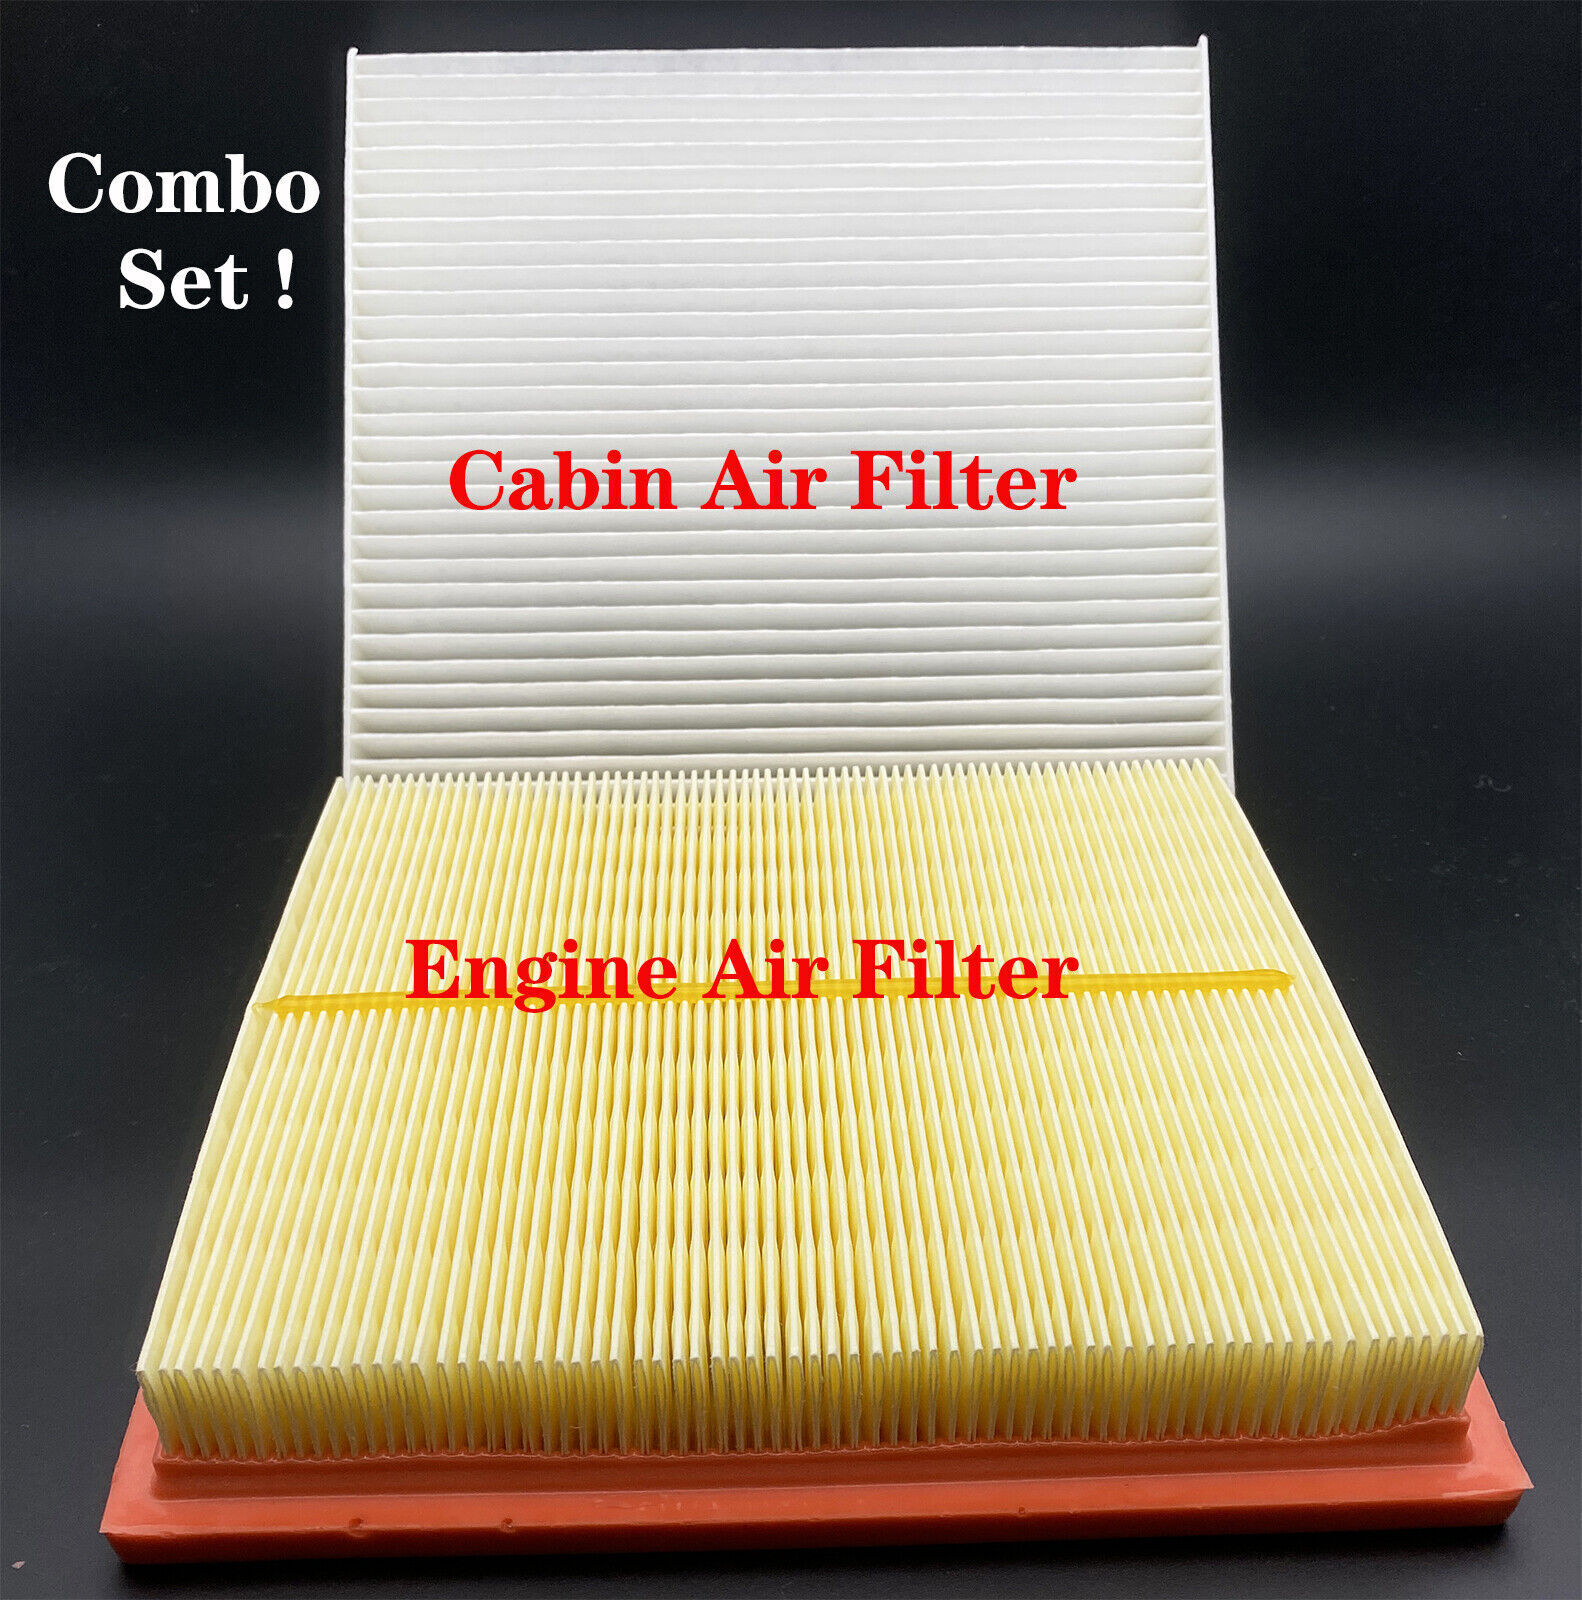 Engine&Cabin Air Filter Combo Set For 2012-17 Toyota Prius Plug-In, Prius V 1.8L